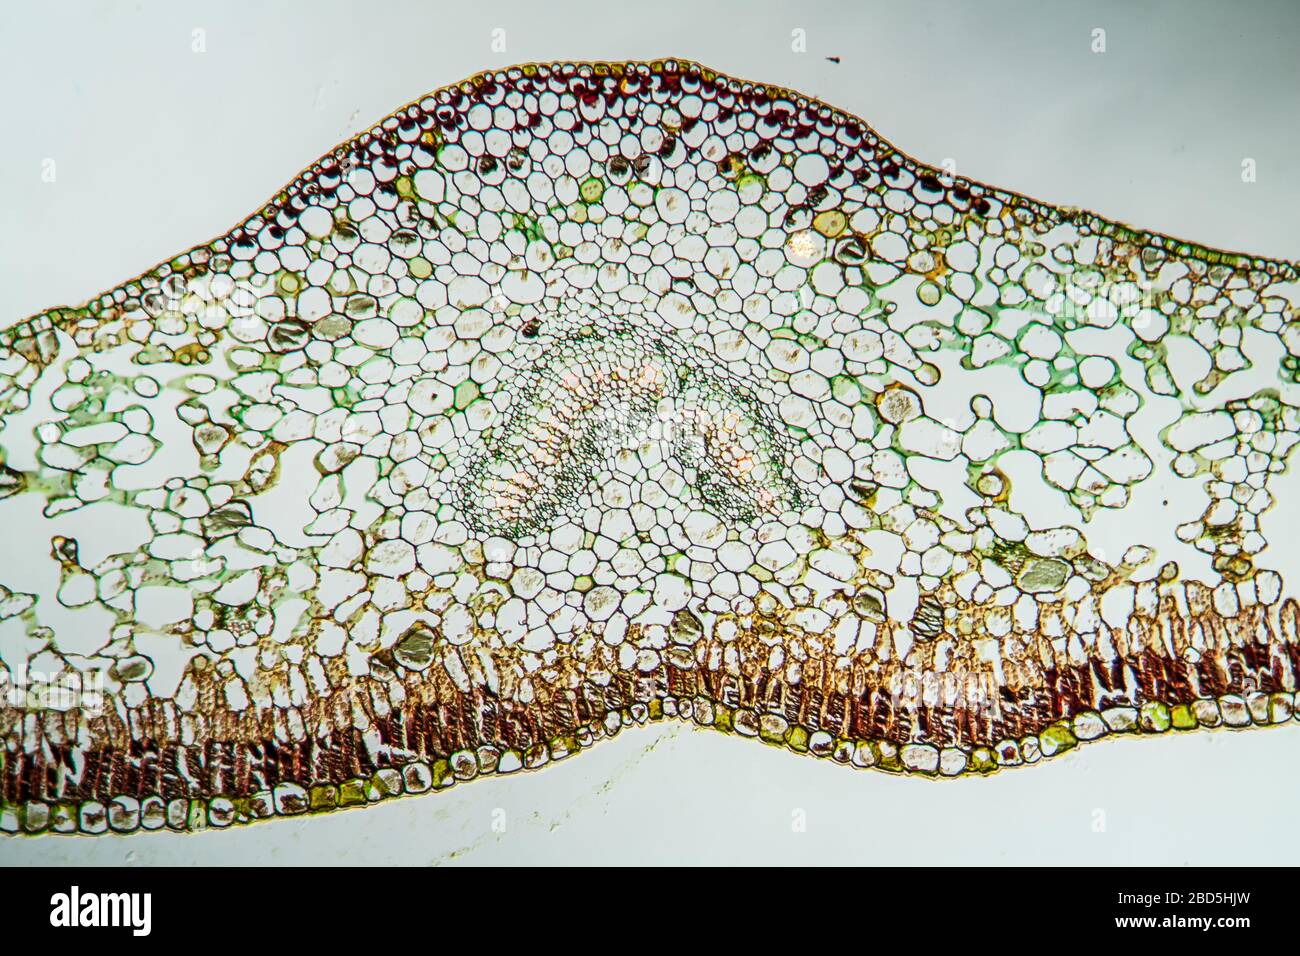 Gentian leaf in cross section 200x Stock Photo